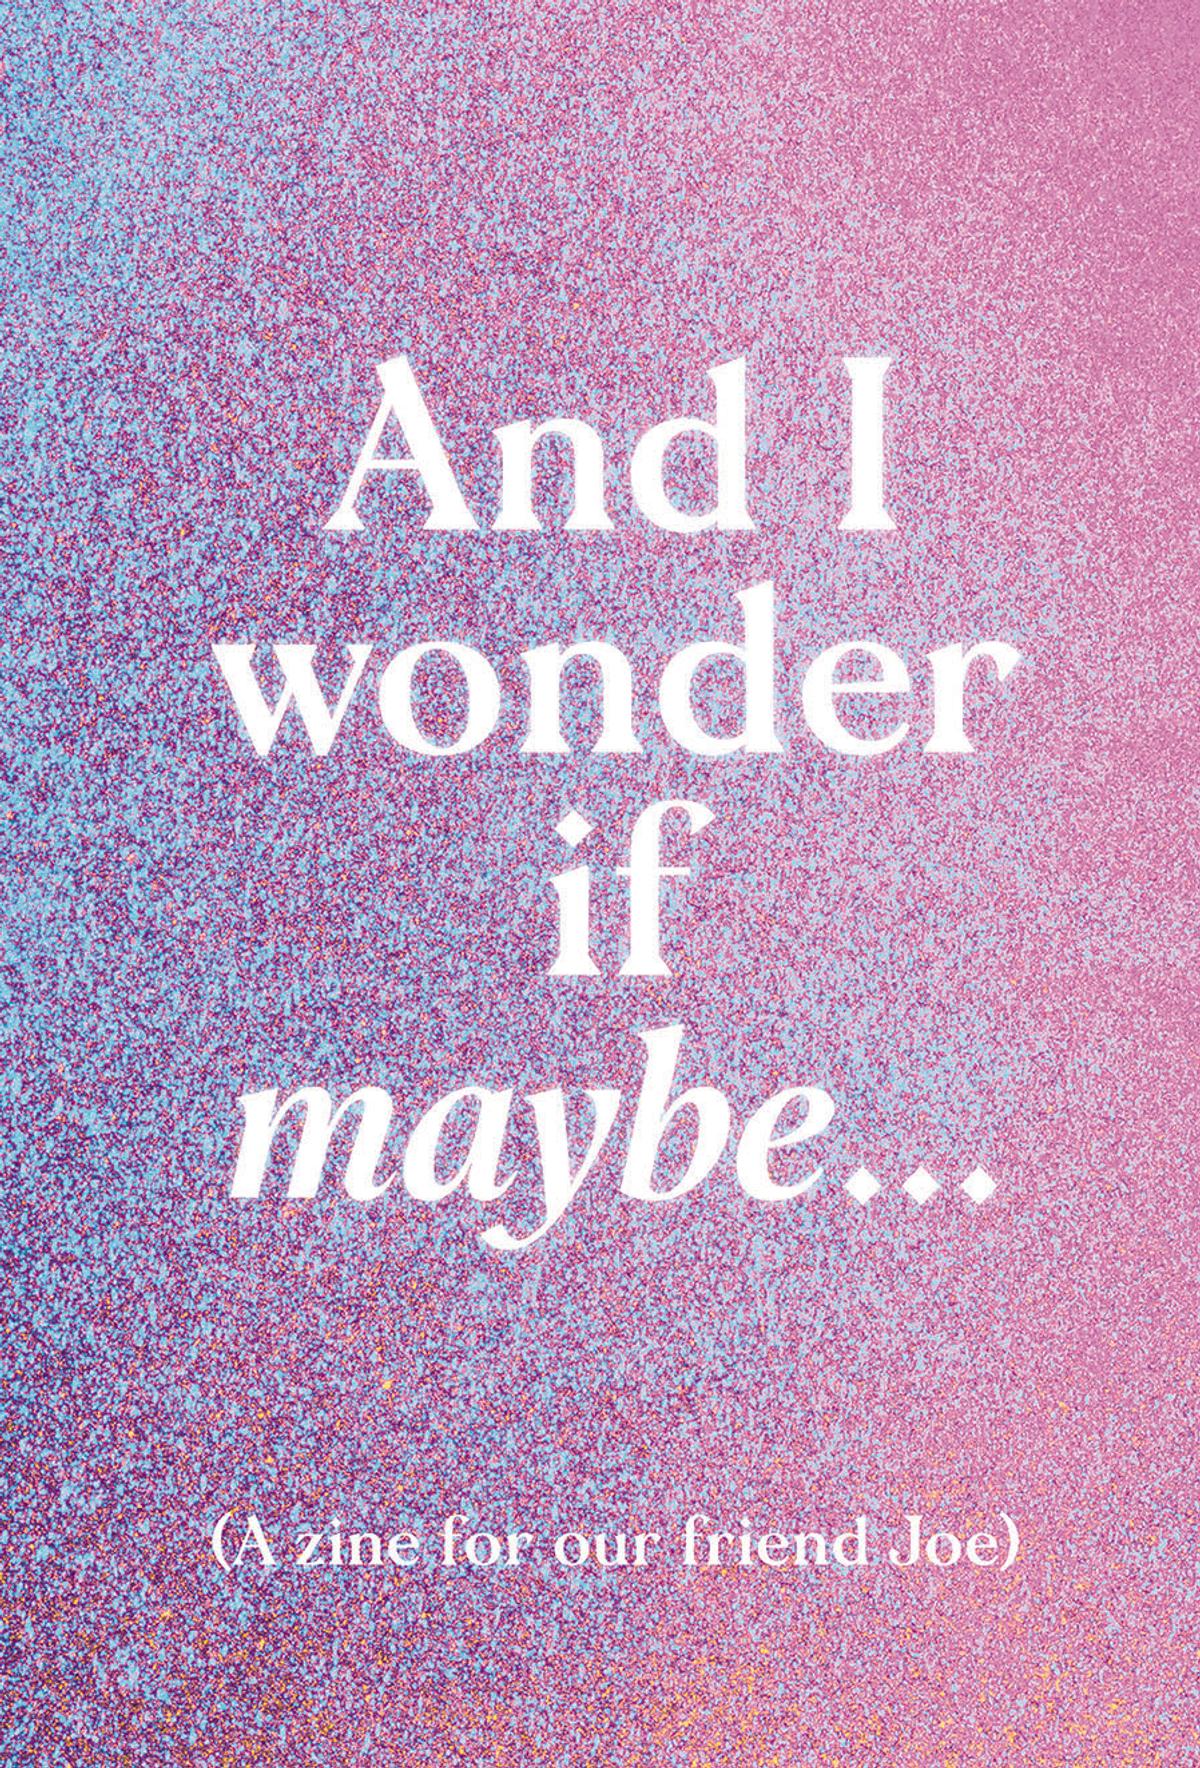 And I wonder if maybe (a zine for our friend Joe)